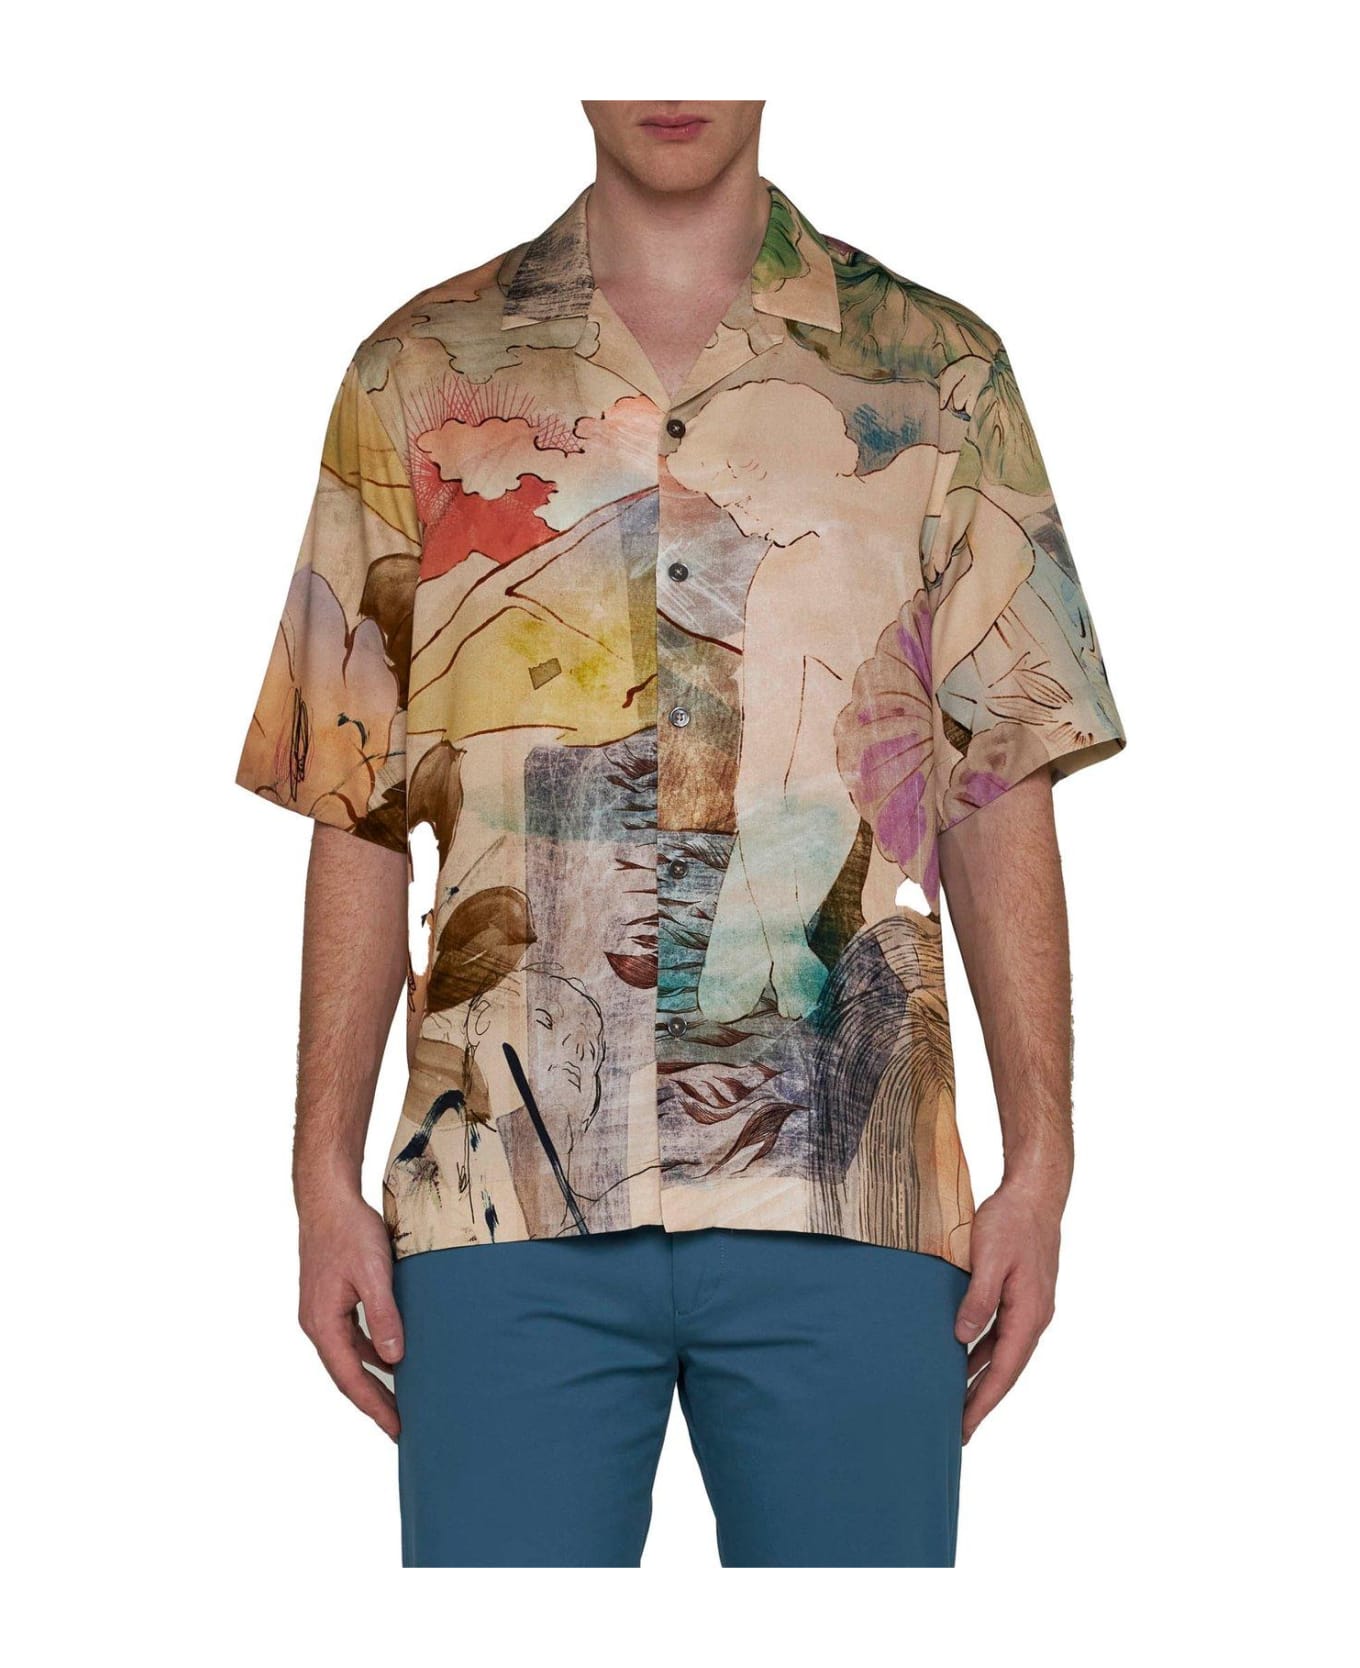 Paul Smith Graphic Printed Short-sleeved Shirt - BEIGE シャツ